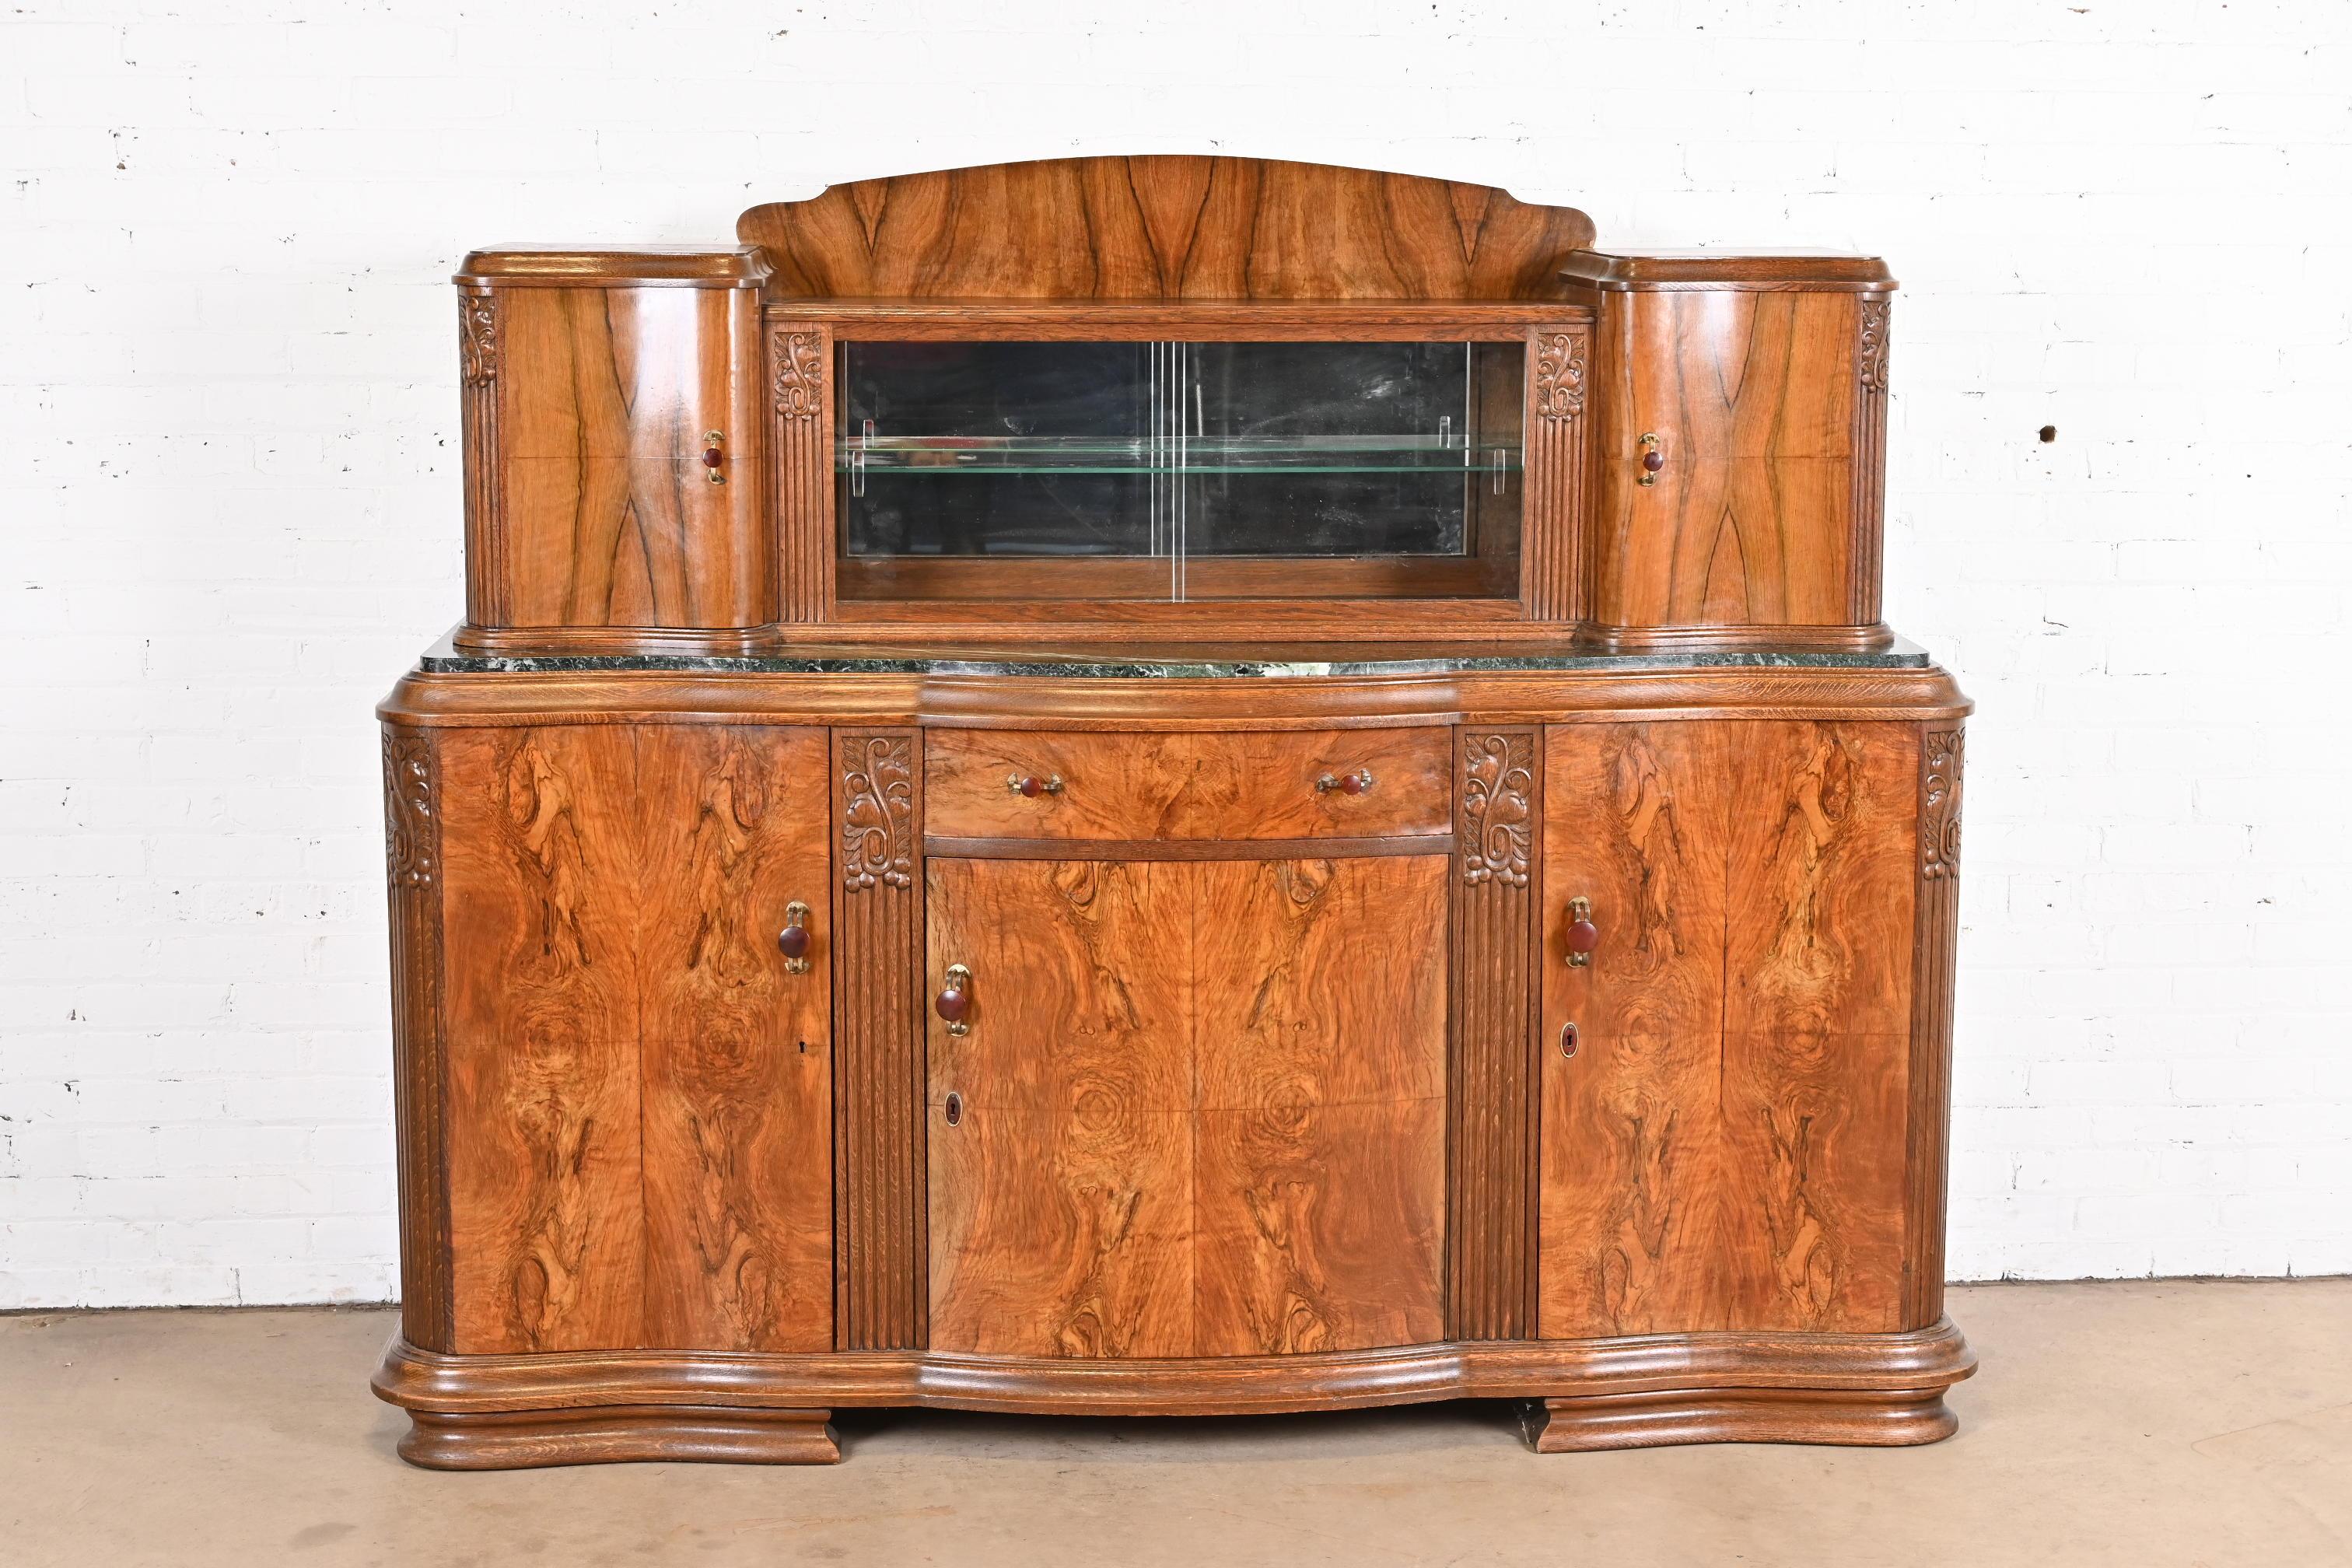 An outstanding French Art Deco sideboard, credenza, or bar cabinet

In the manner of Jules Leleu

France, circa 1930s

Carved oak, with gorgeous book-matched burled walnut front, green marble top, and original bakelite and brass hardware.